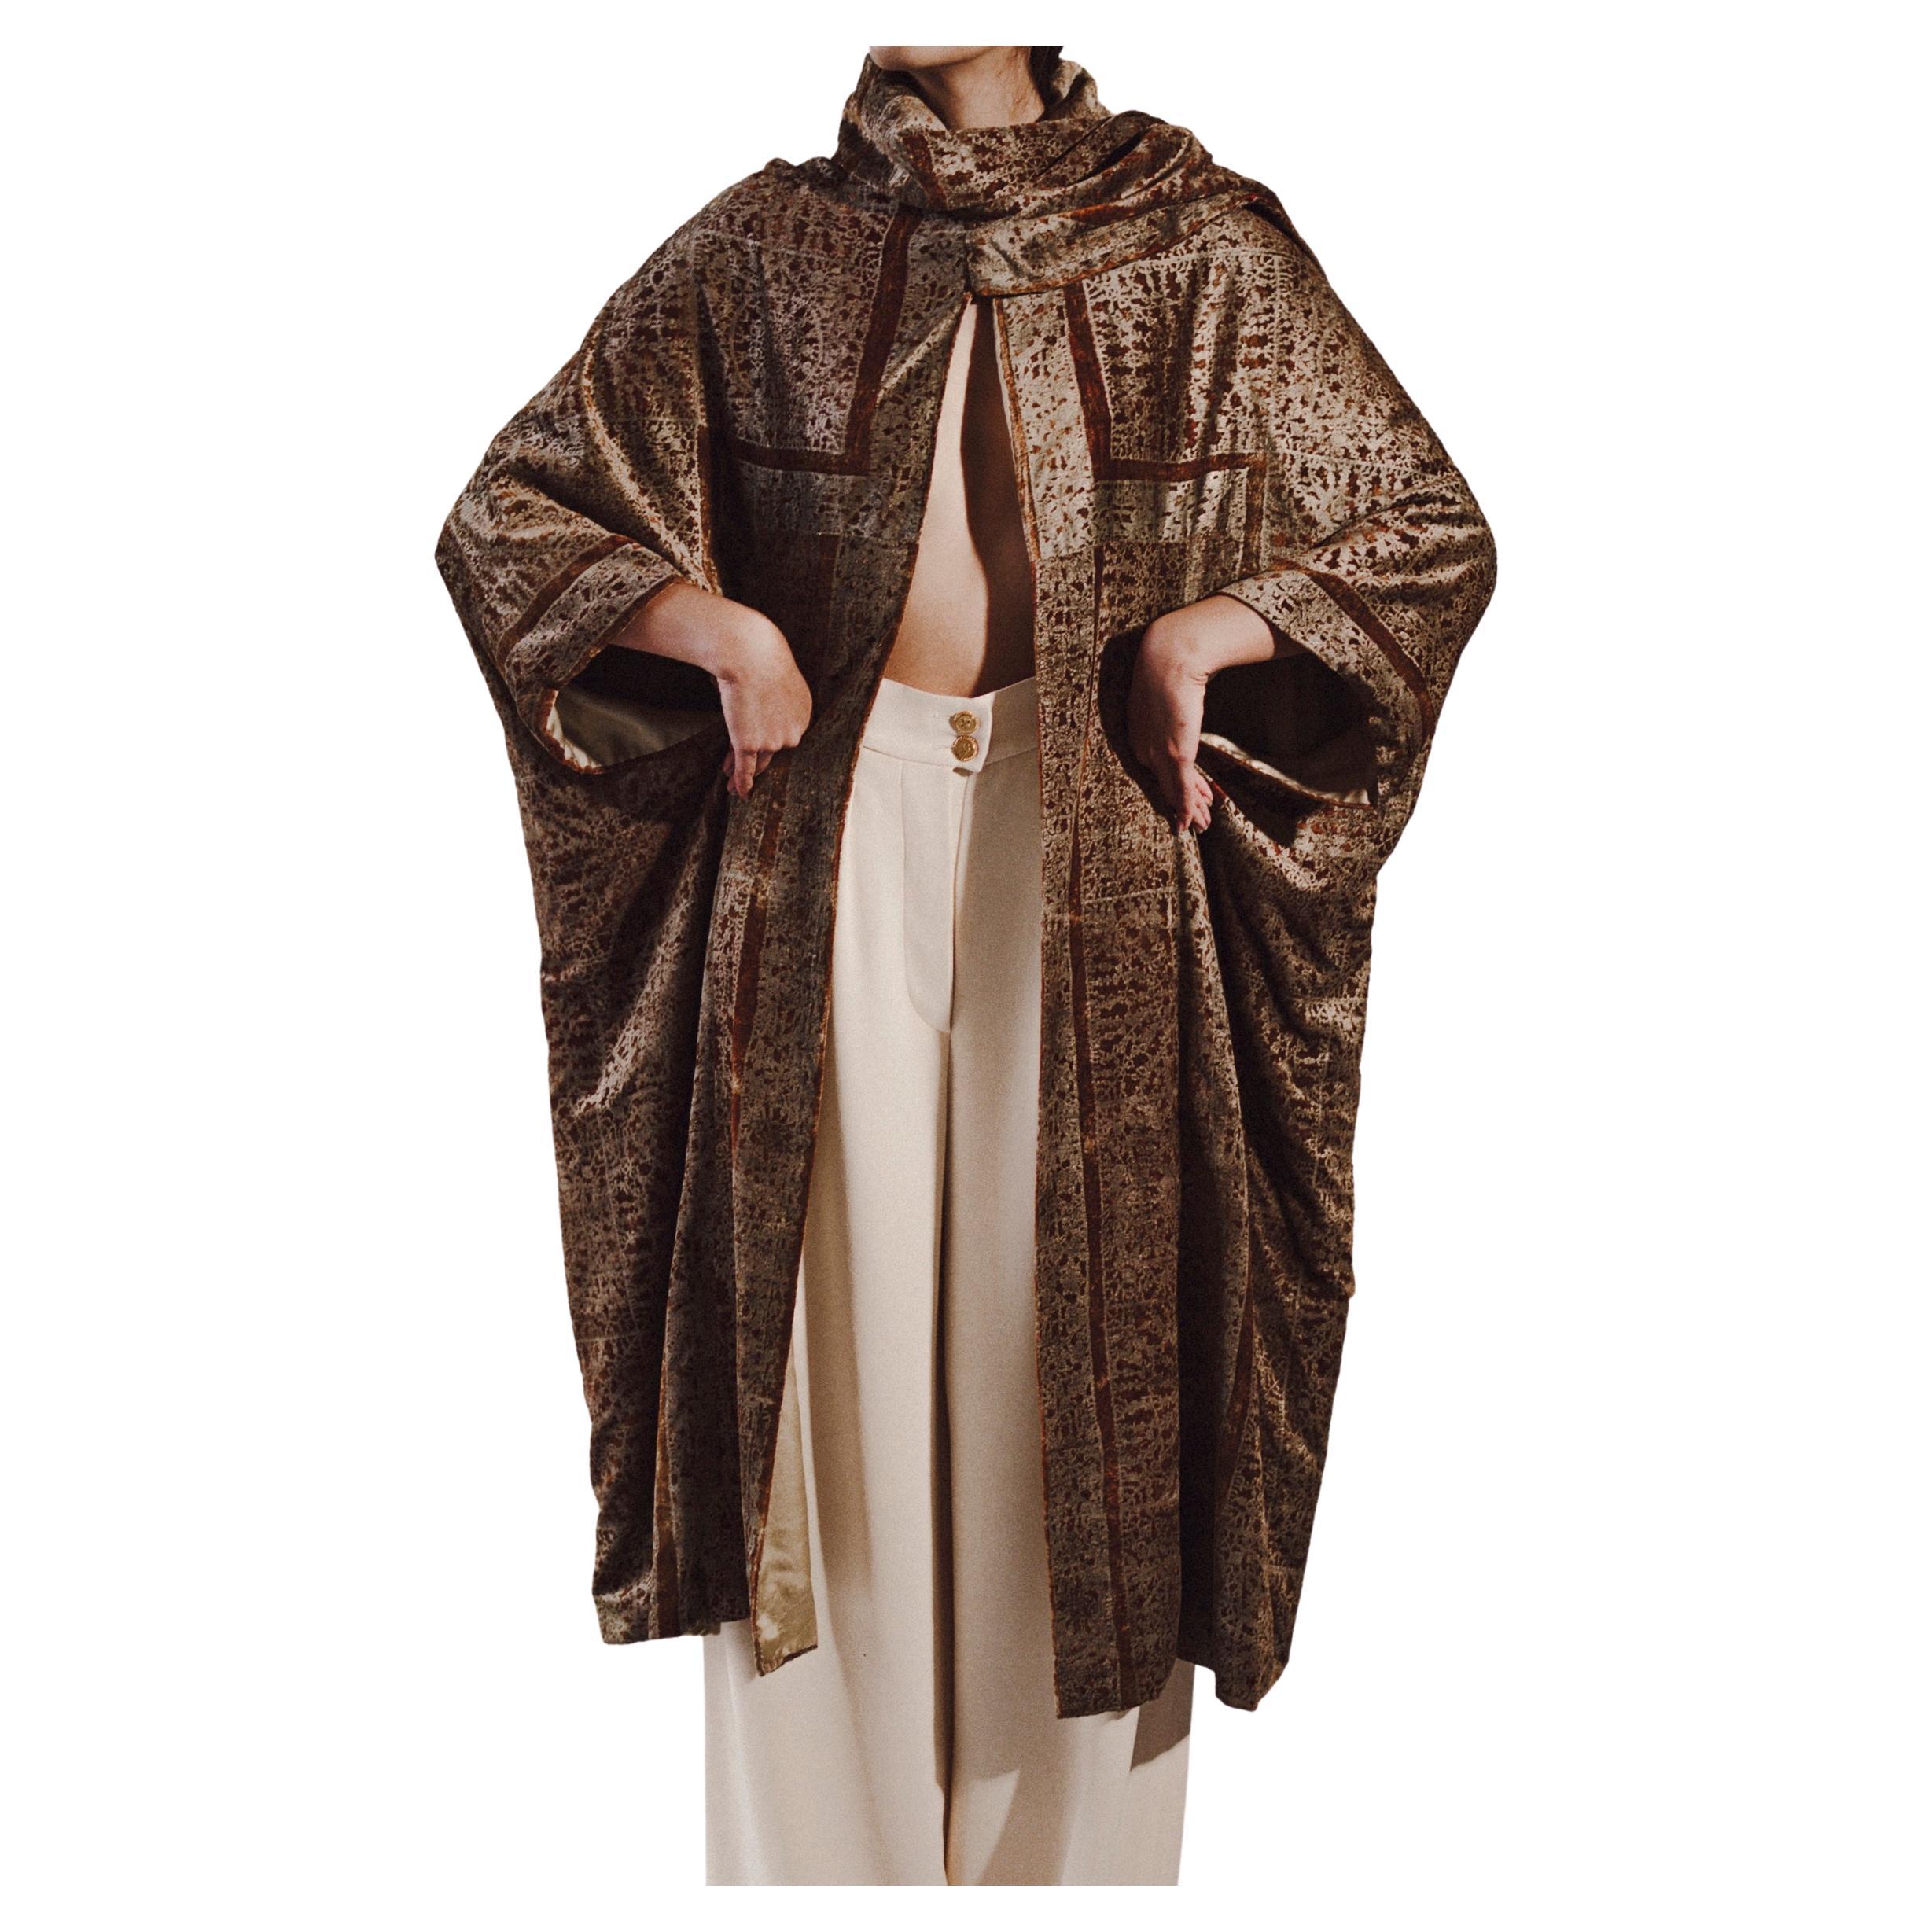 1930s Mariano Fortuny Gold Stenciled Evening Coat  For Sale